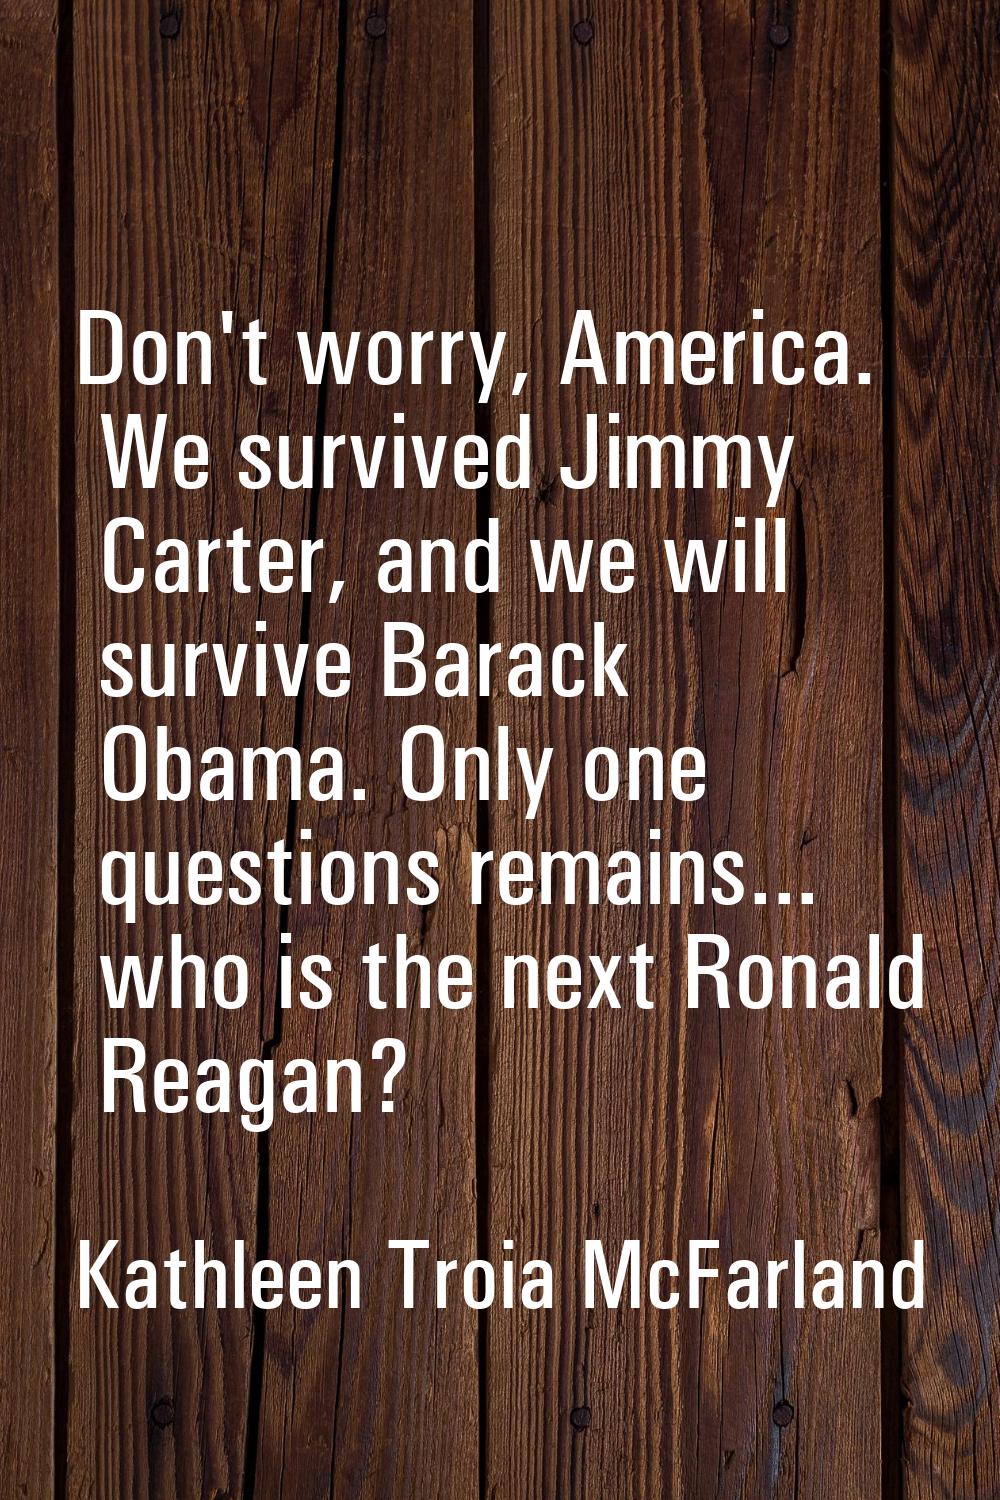 Don't worry, America. We survived Jimmy Carter, and we will survive Barack Obama. Only one question